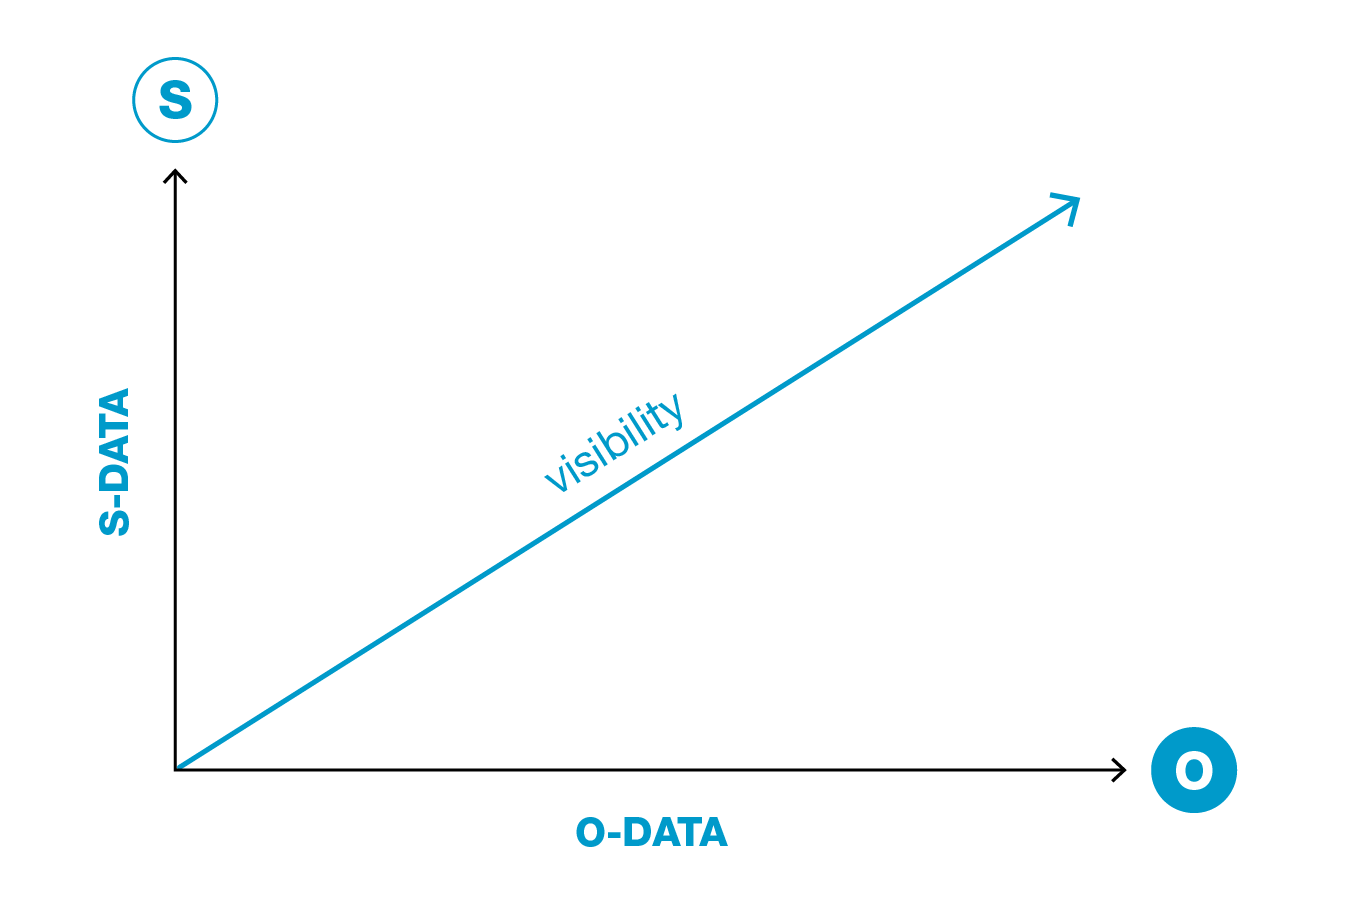 why both S-data and O-data are needed